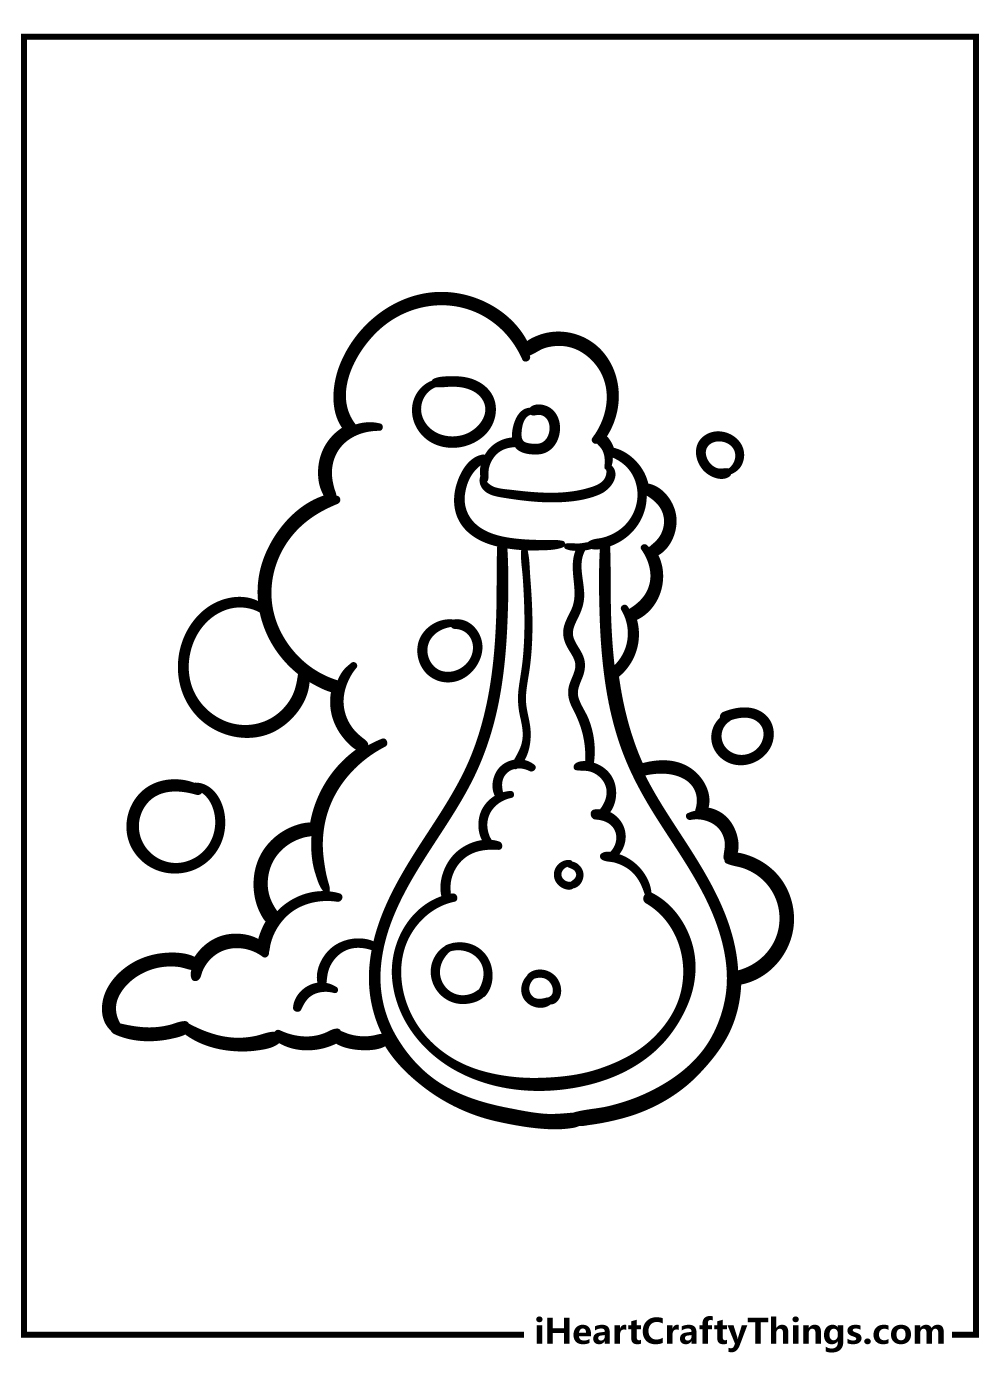 Science Coloring Pages for kids free download